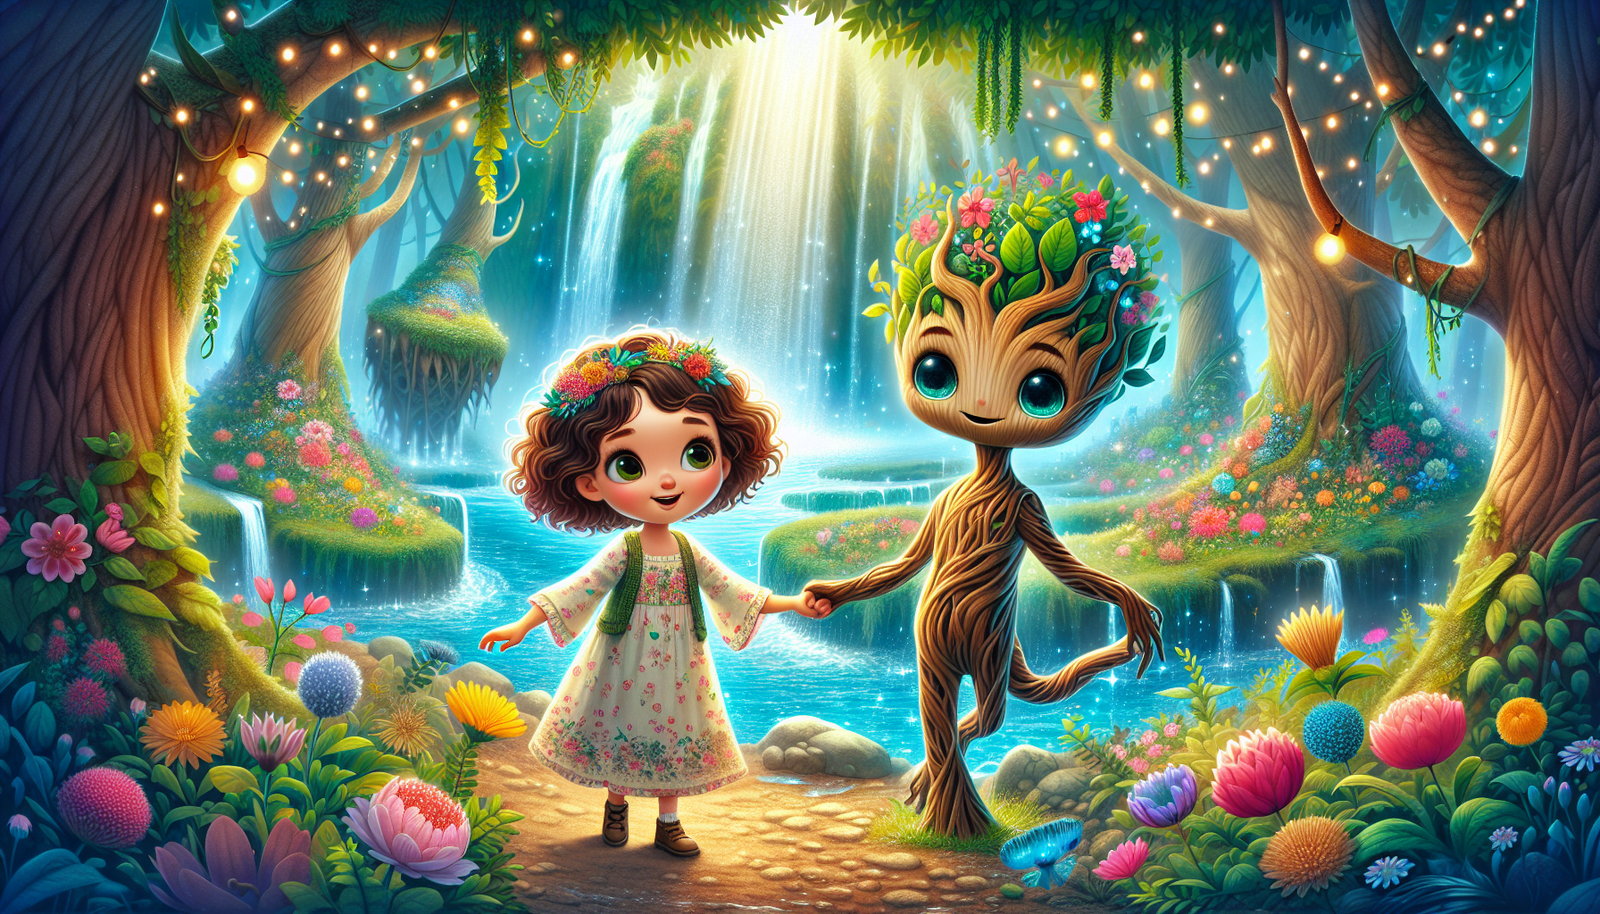 Digital art of a young girl is dancing with a tree spirit in a forest.